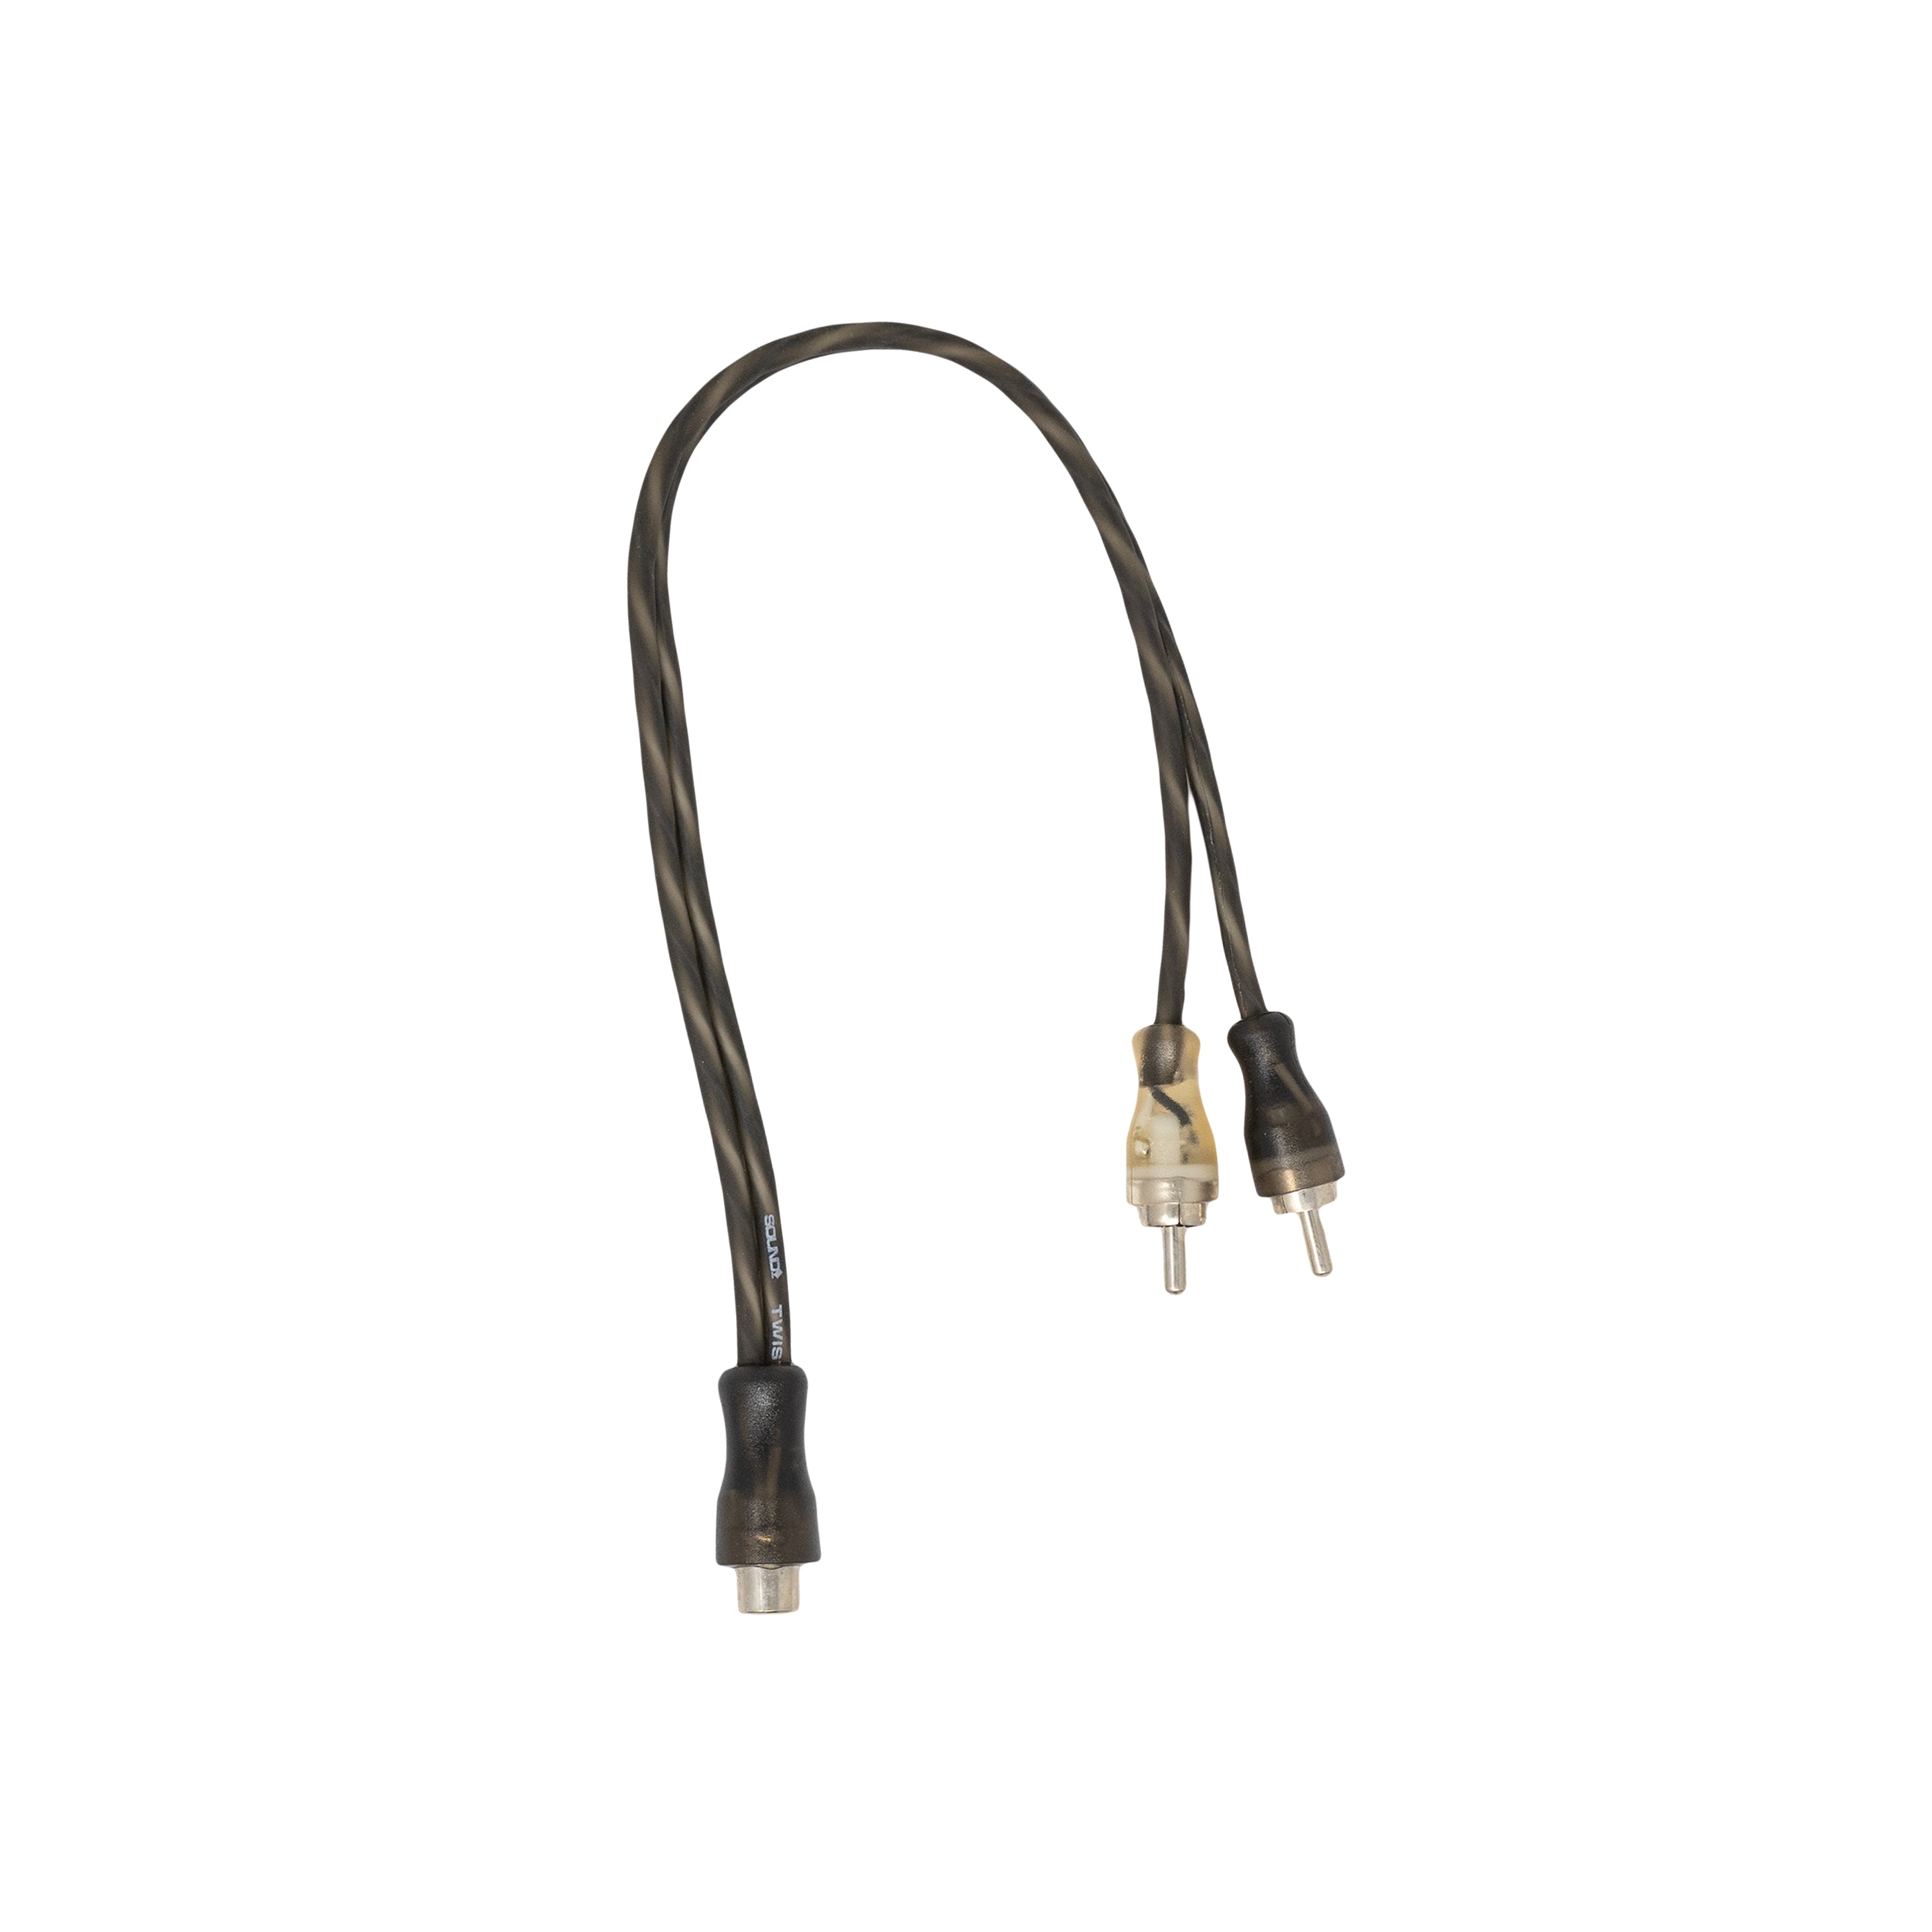 SoundBox LCY-2M, Twisted Pair RCA Y-Splitter, 2 Male - 1 Female - (Polybag Packaging)